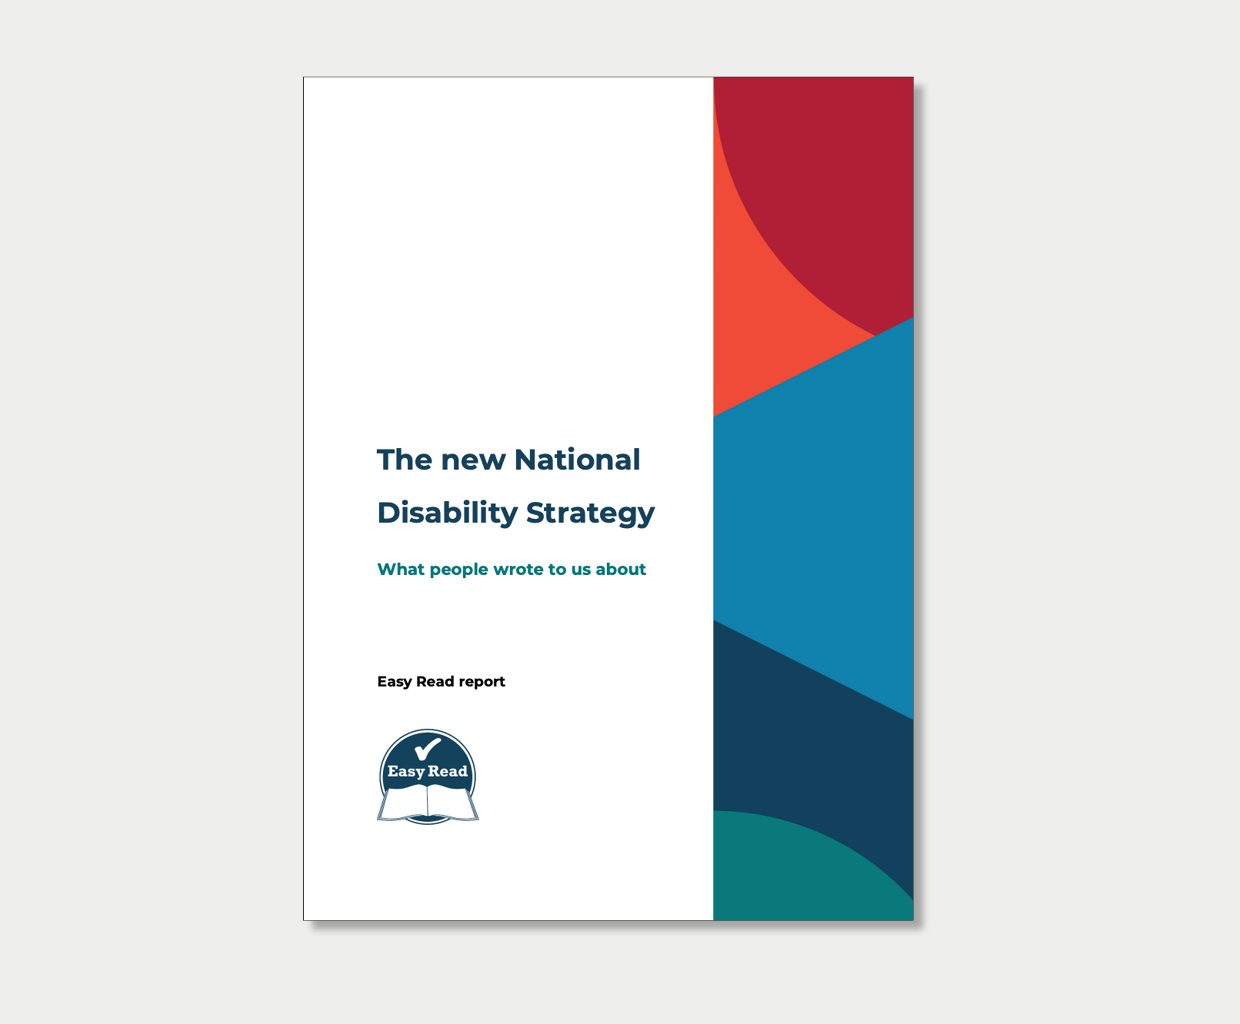 The new National Disability Strategy